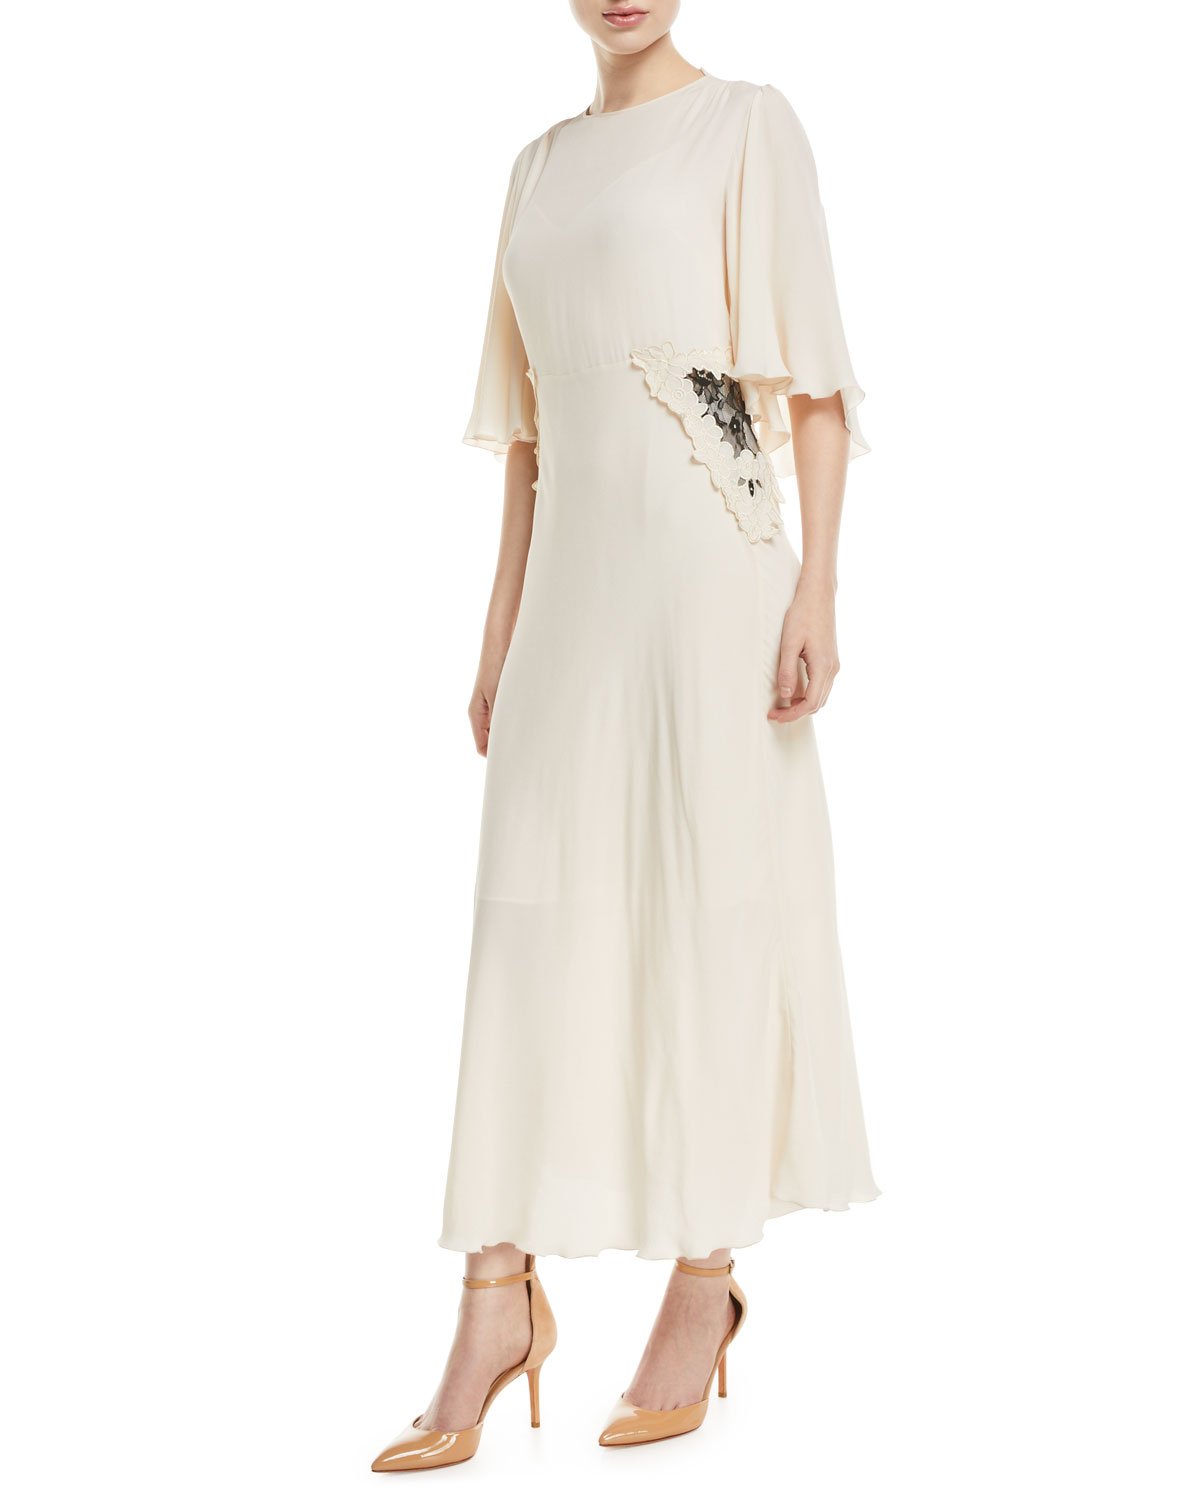 See by Chloe Long Flutter-Sleeve Dress with Applied Lace.jpg